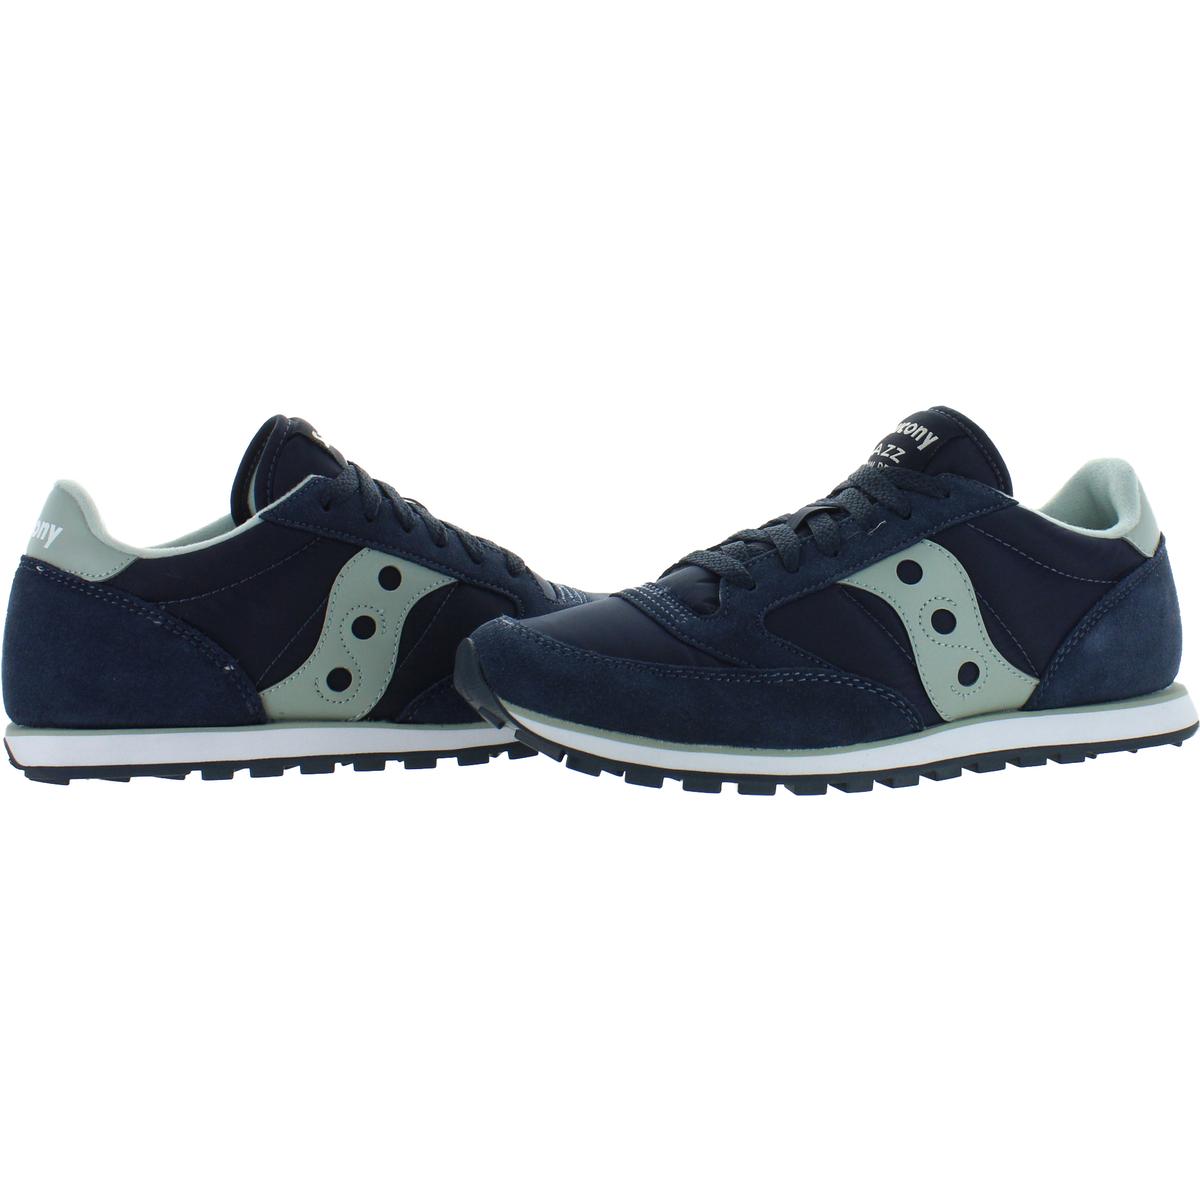 Saucony Mens Jazz Low Pro Suede Trainers Comfort Sneakers Shoes BHFO ...